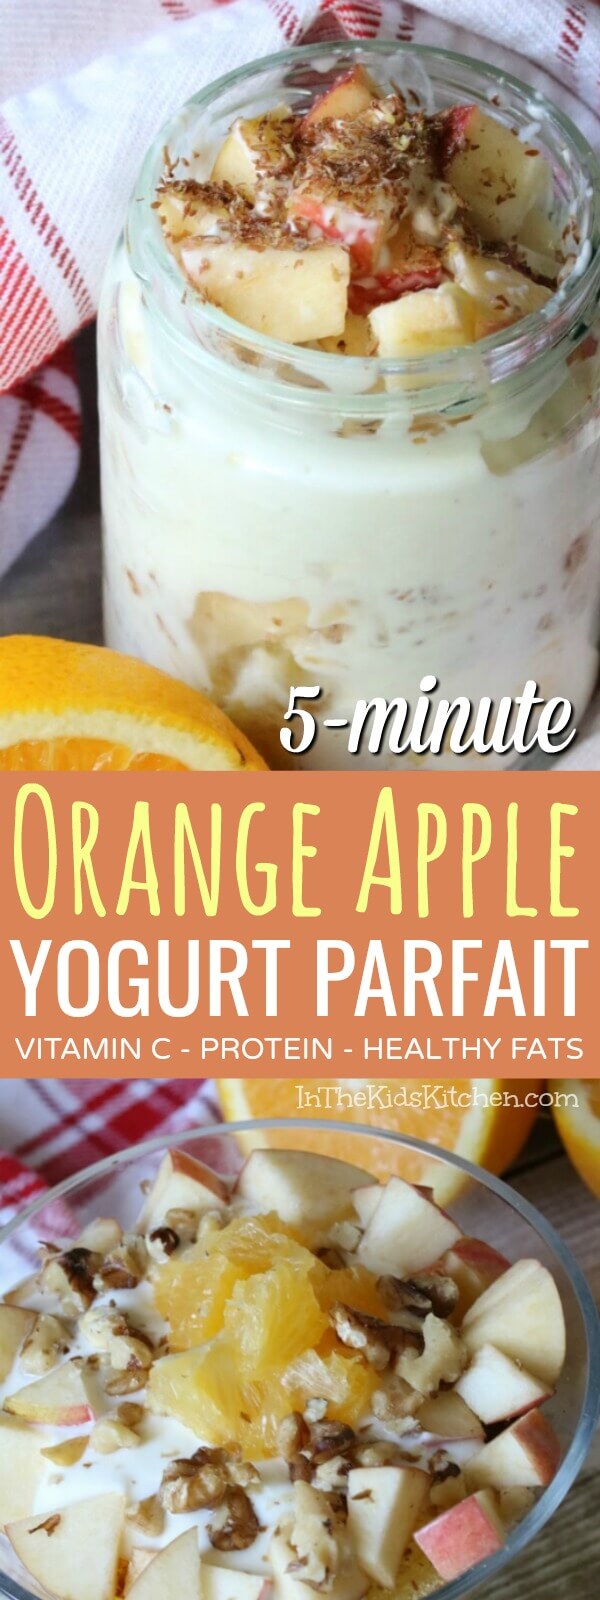 Our easy orange apple yogurt parfait is a healthy way to start the day! Lots of Vitamin C, good fats, protein, and no processed sugar. Kid-approved and perfect for anyone who wants a quick and wholesome breakfast or mid-day snack.